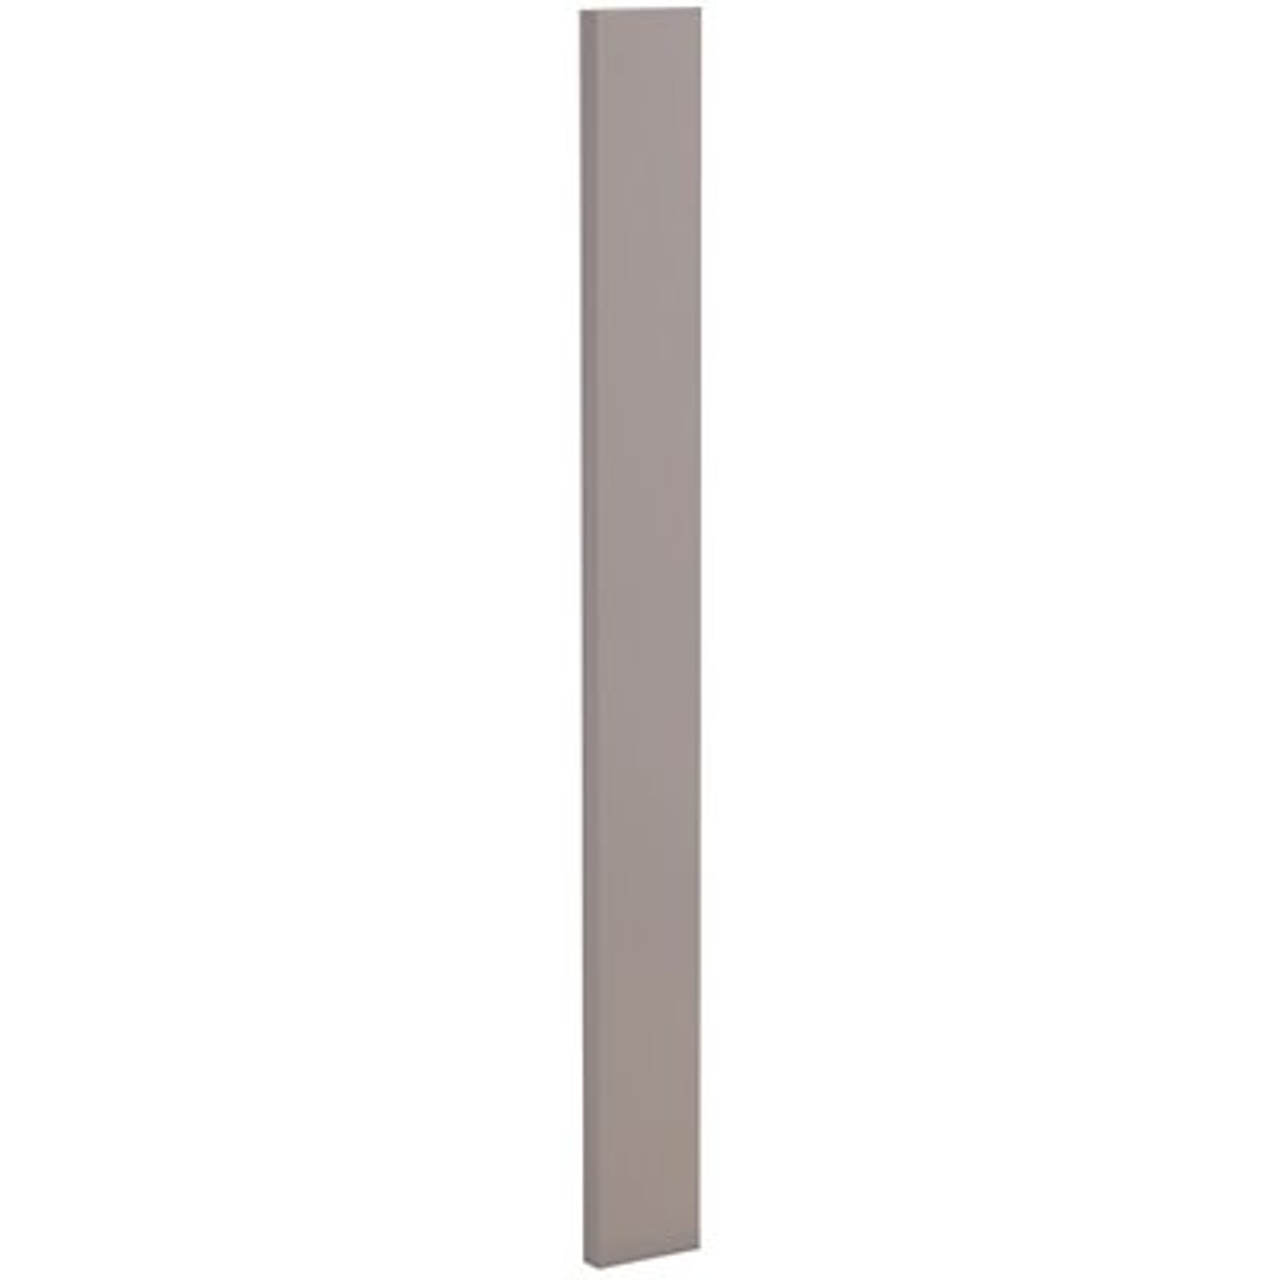 Arlington Veiled Gray Shaker Assembled Plywood 3 In. X 84 In. X 0.75 In. Kitchen Cabinet Filler Strip